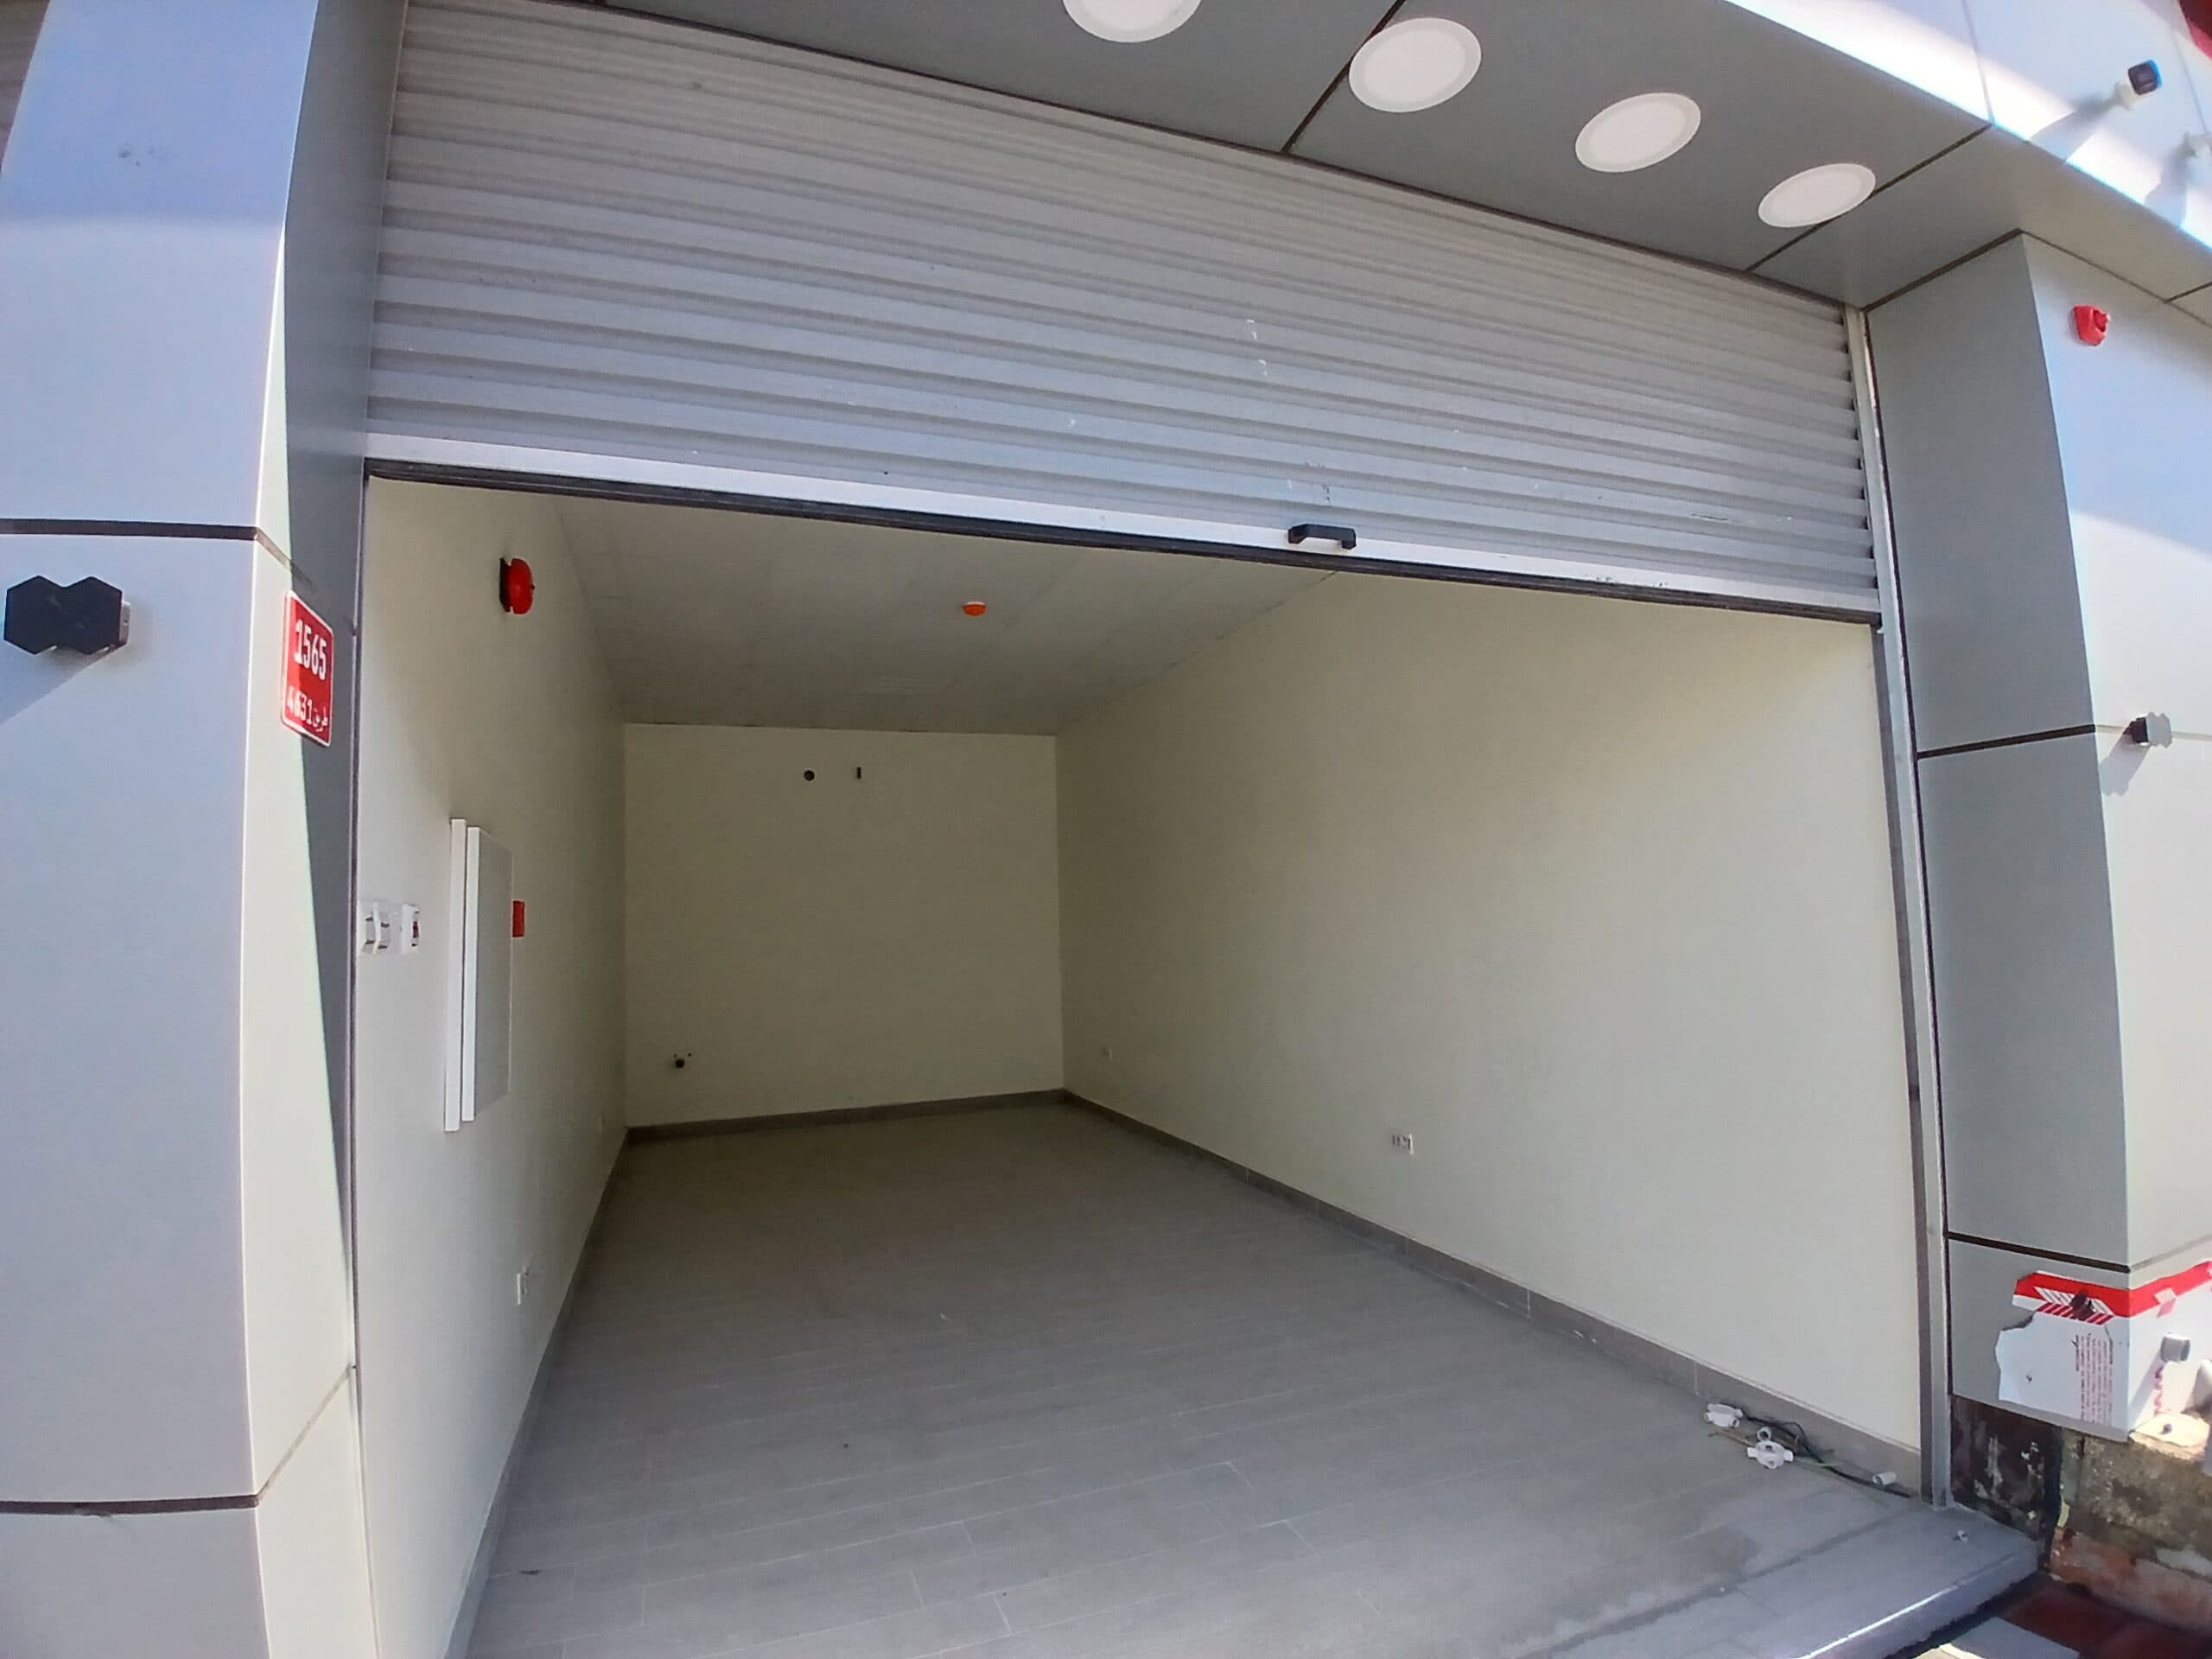 An empty commercial vehicle space with a rolled-up white shutter door and a gray floor; lighting is installed on the ceiling.